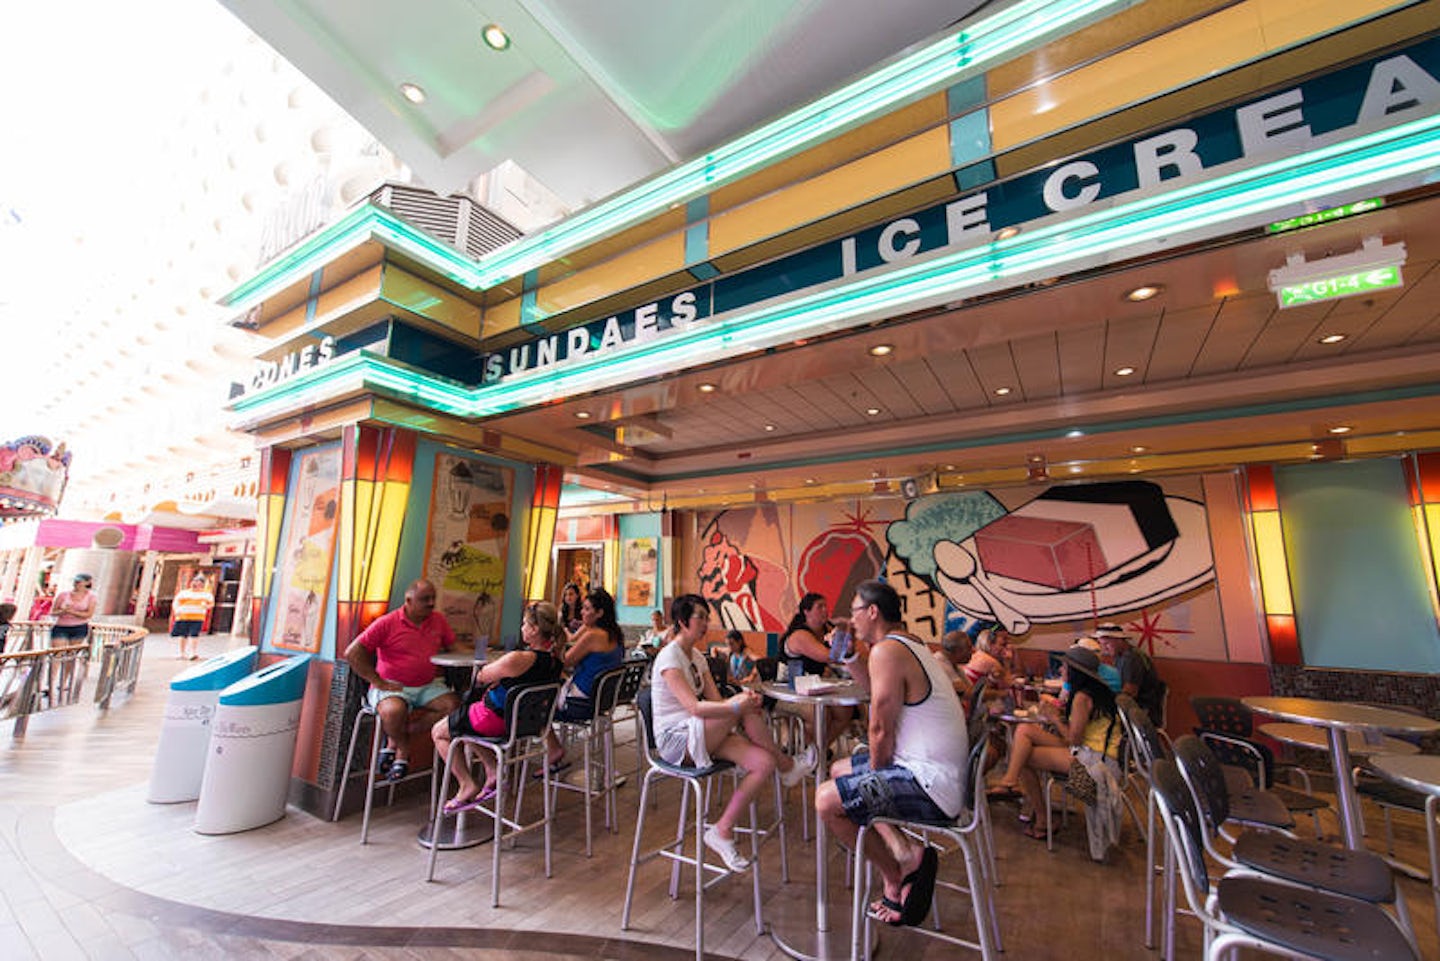 Cups & Scoops on Oasis of the Seas